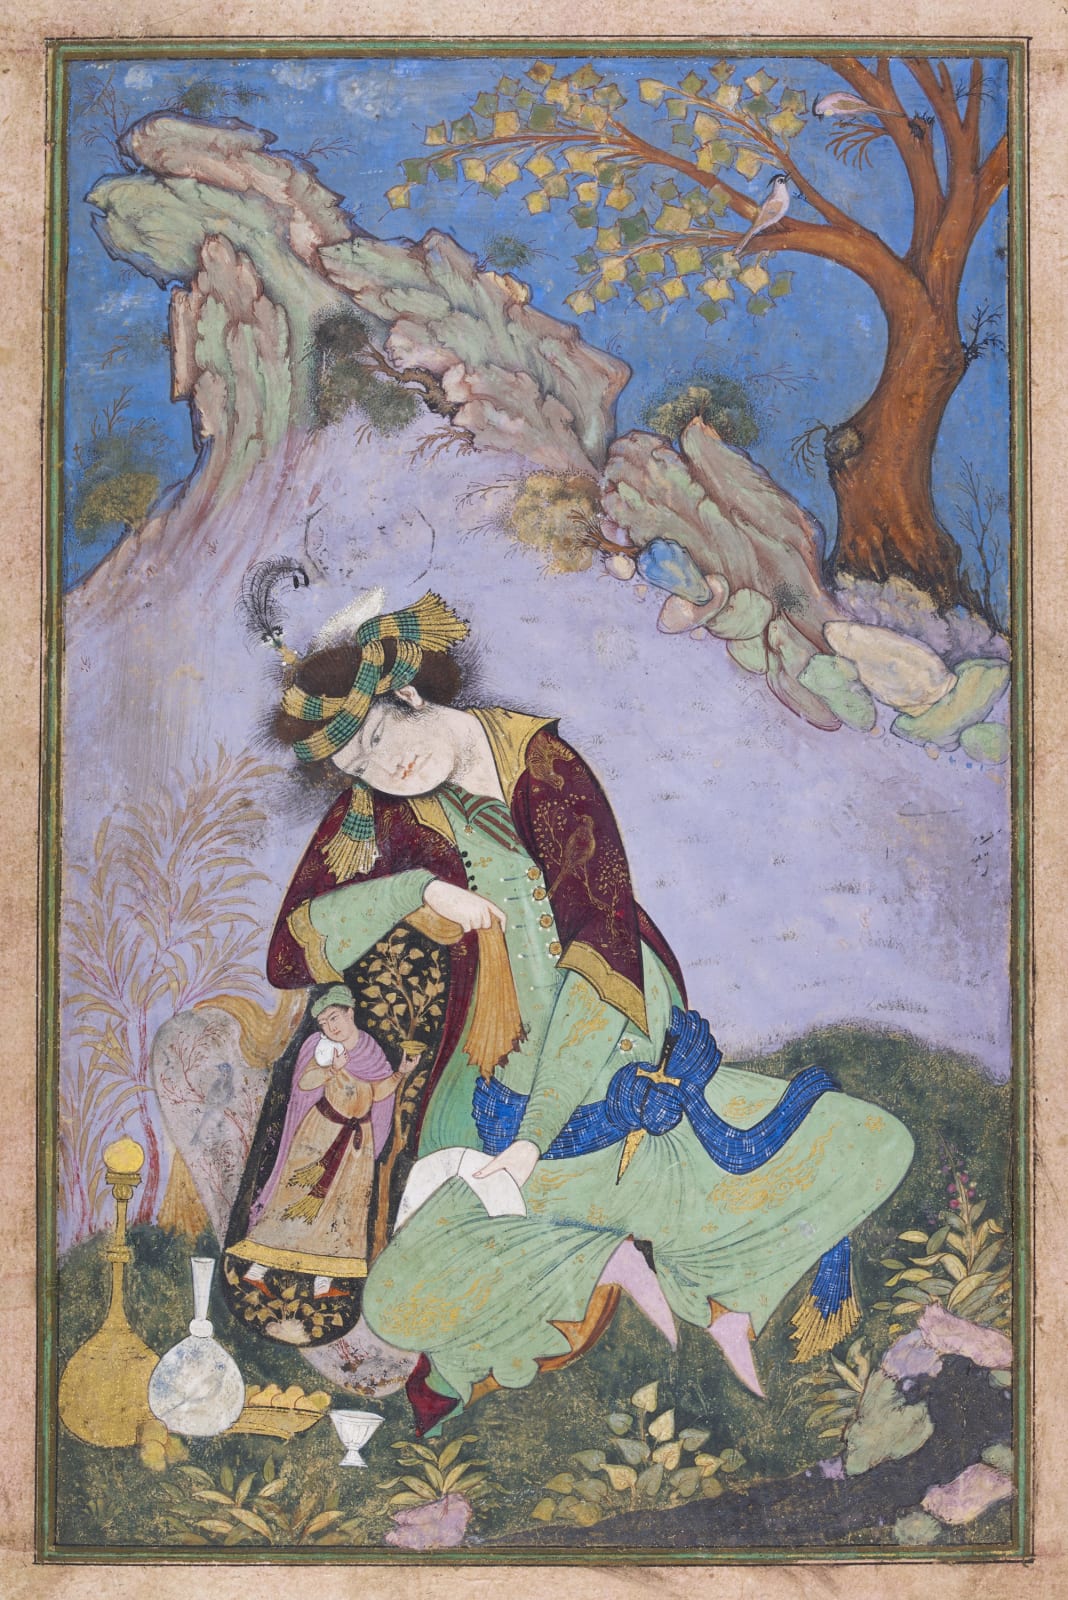 A Youth in Persian Costume, Golconda, c. 1630–40